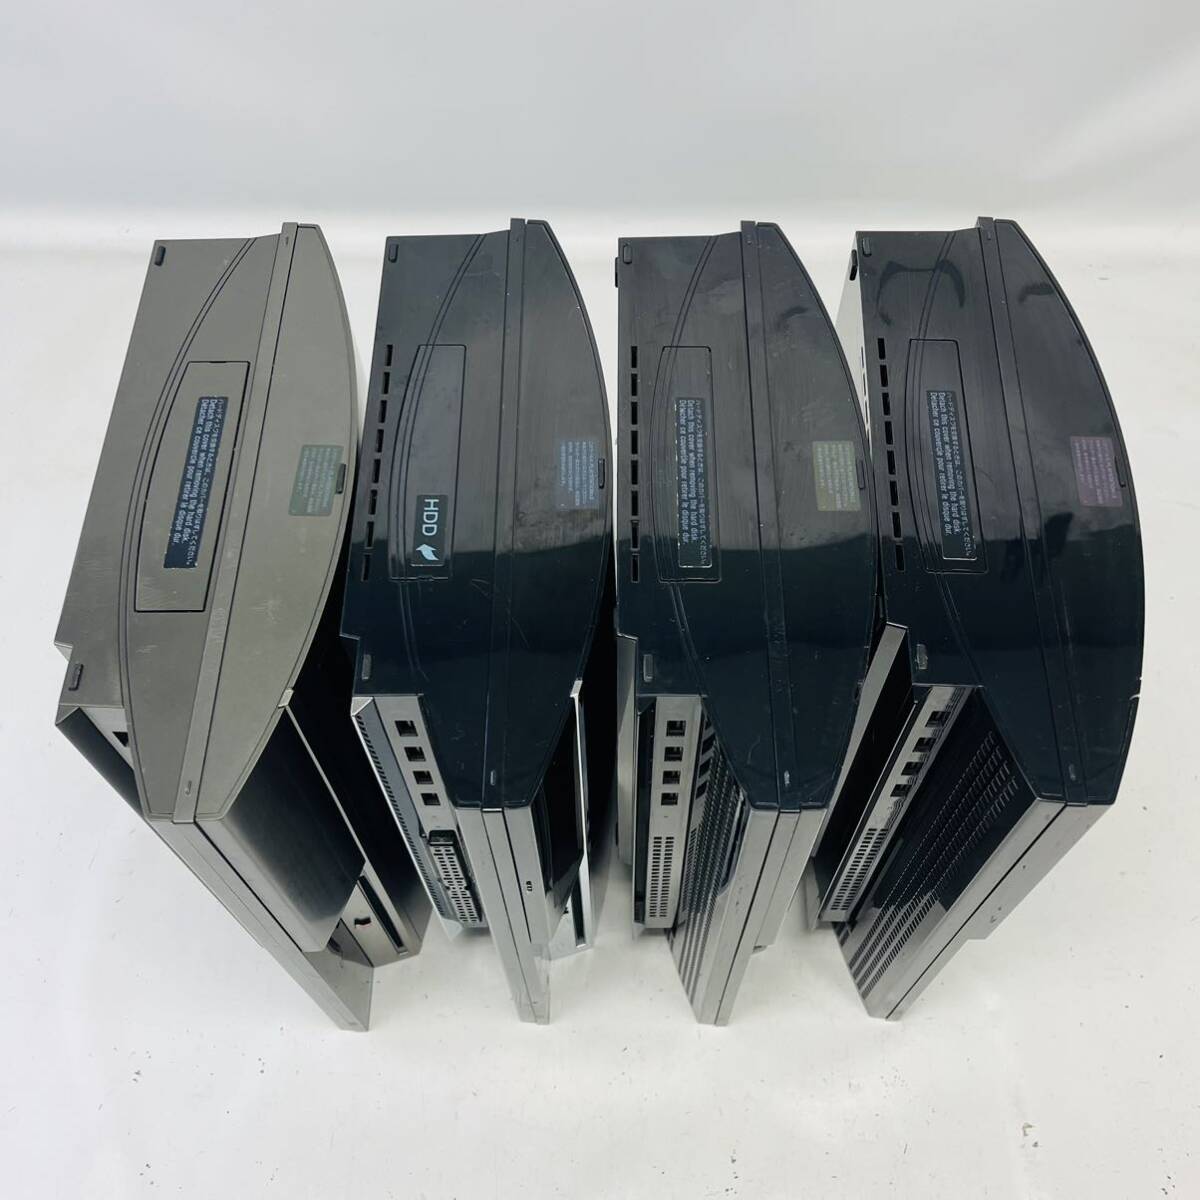 *1 jpy ~* SONY PS3 initial model body CECHA00 CECHB00 CECHH00 together 4 pcs. set Junk operation not yet verification PlayStation 3 set sale thickness type ⑧